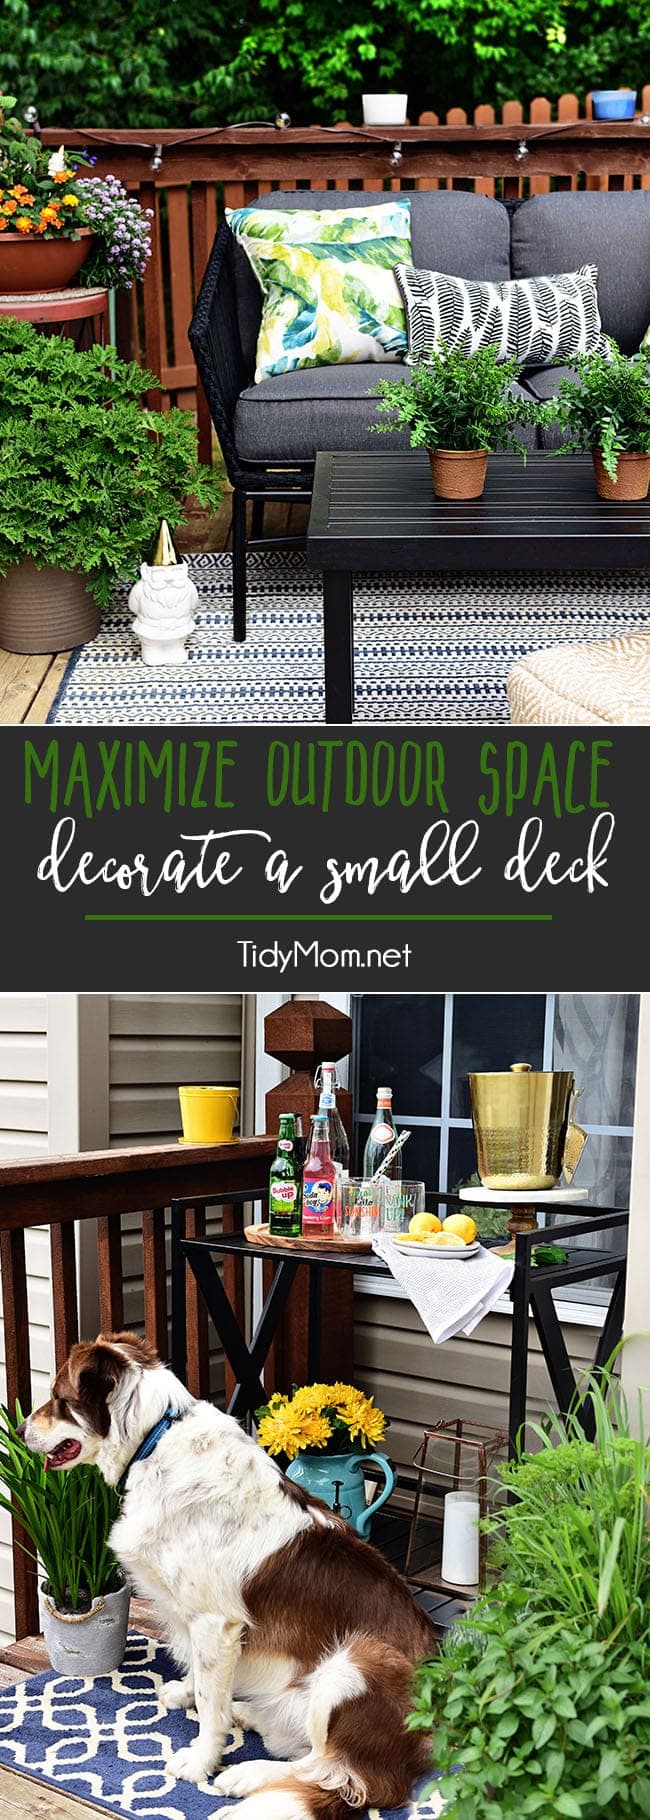 Maximize Outdoor Space! Learn How to Decorate a Small Deck or Patio. Find tips on getting the most out of your small deck or patio along with plants that keep mosquitos and other pests away. Get all the details at TidyMom.net